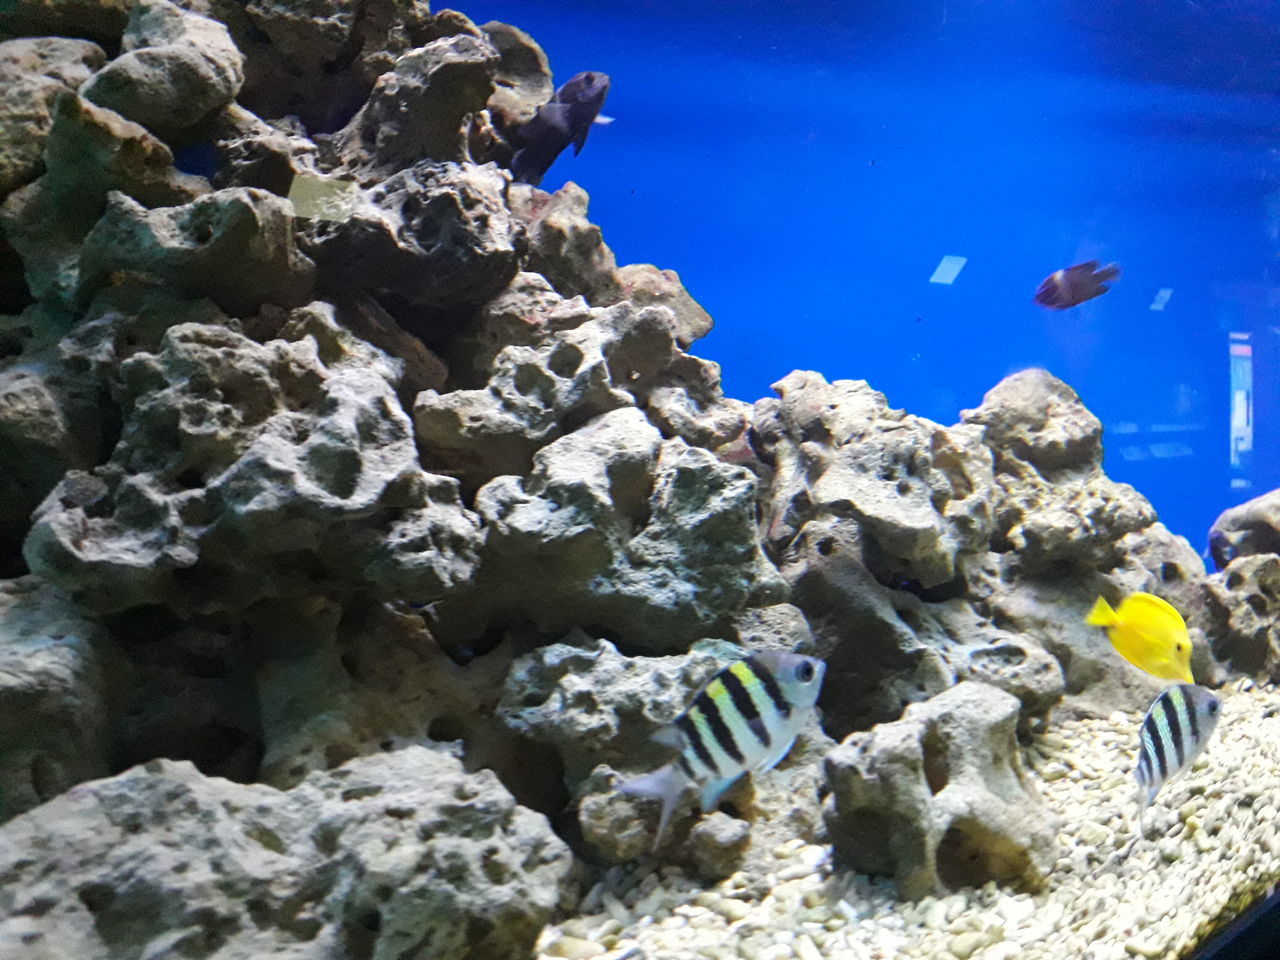 sea, wildlife, reef, water, underwater, animal themes, animal, sea life, animal wildlife, marine biology, undersea, nature, marine, coral reef, coral, fish, aquarium, blue, rock, sports, beauty in nature, adventure, swimming, group of animals, coral reef fish, no people, outdoors, tropical fish, water sports